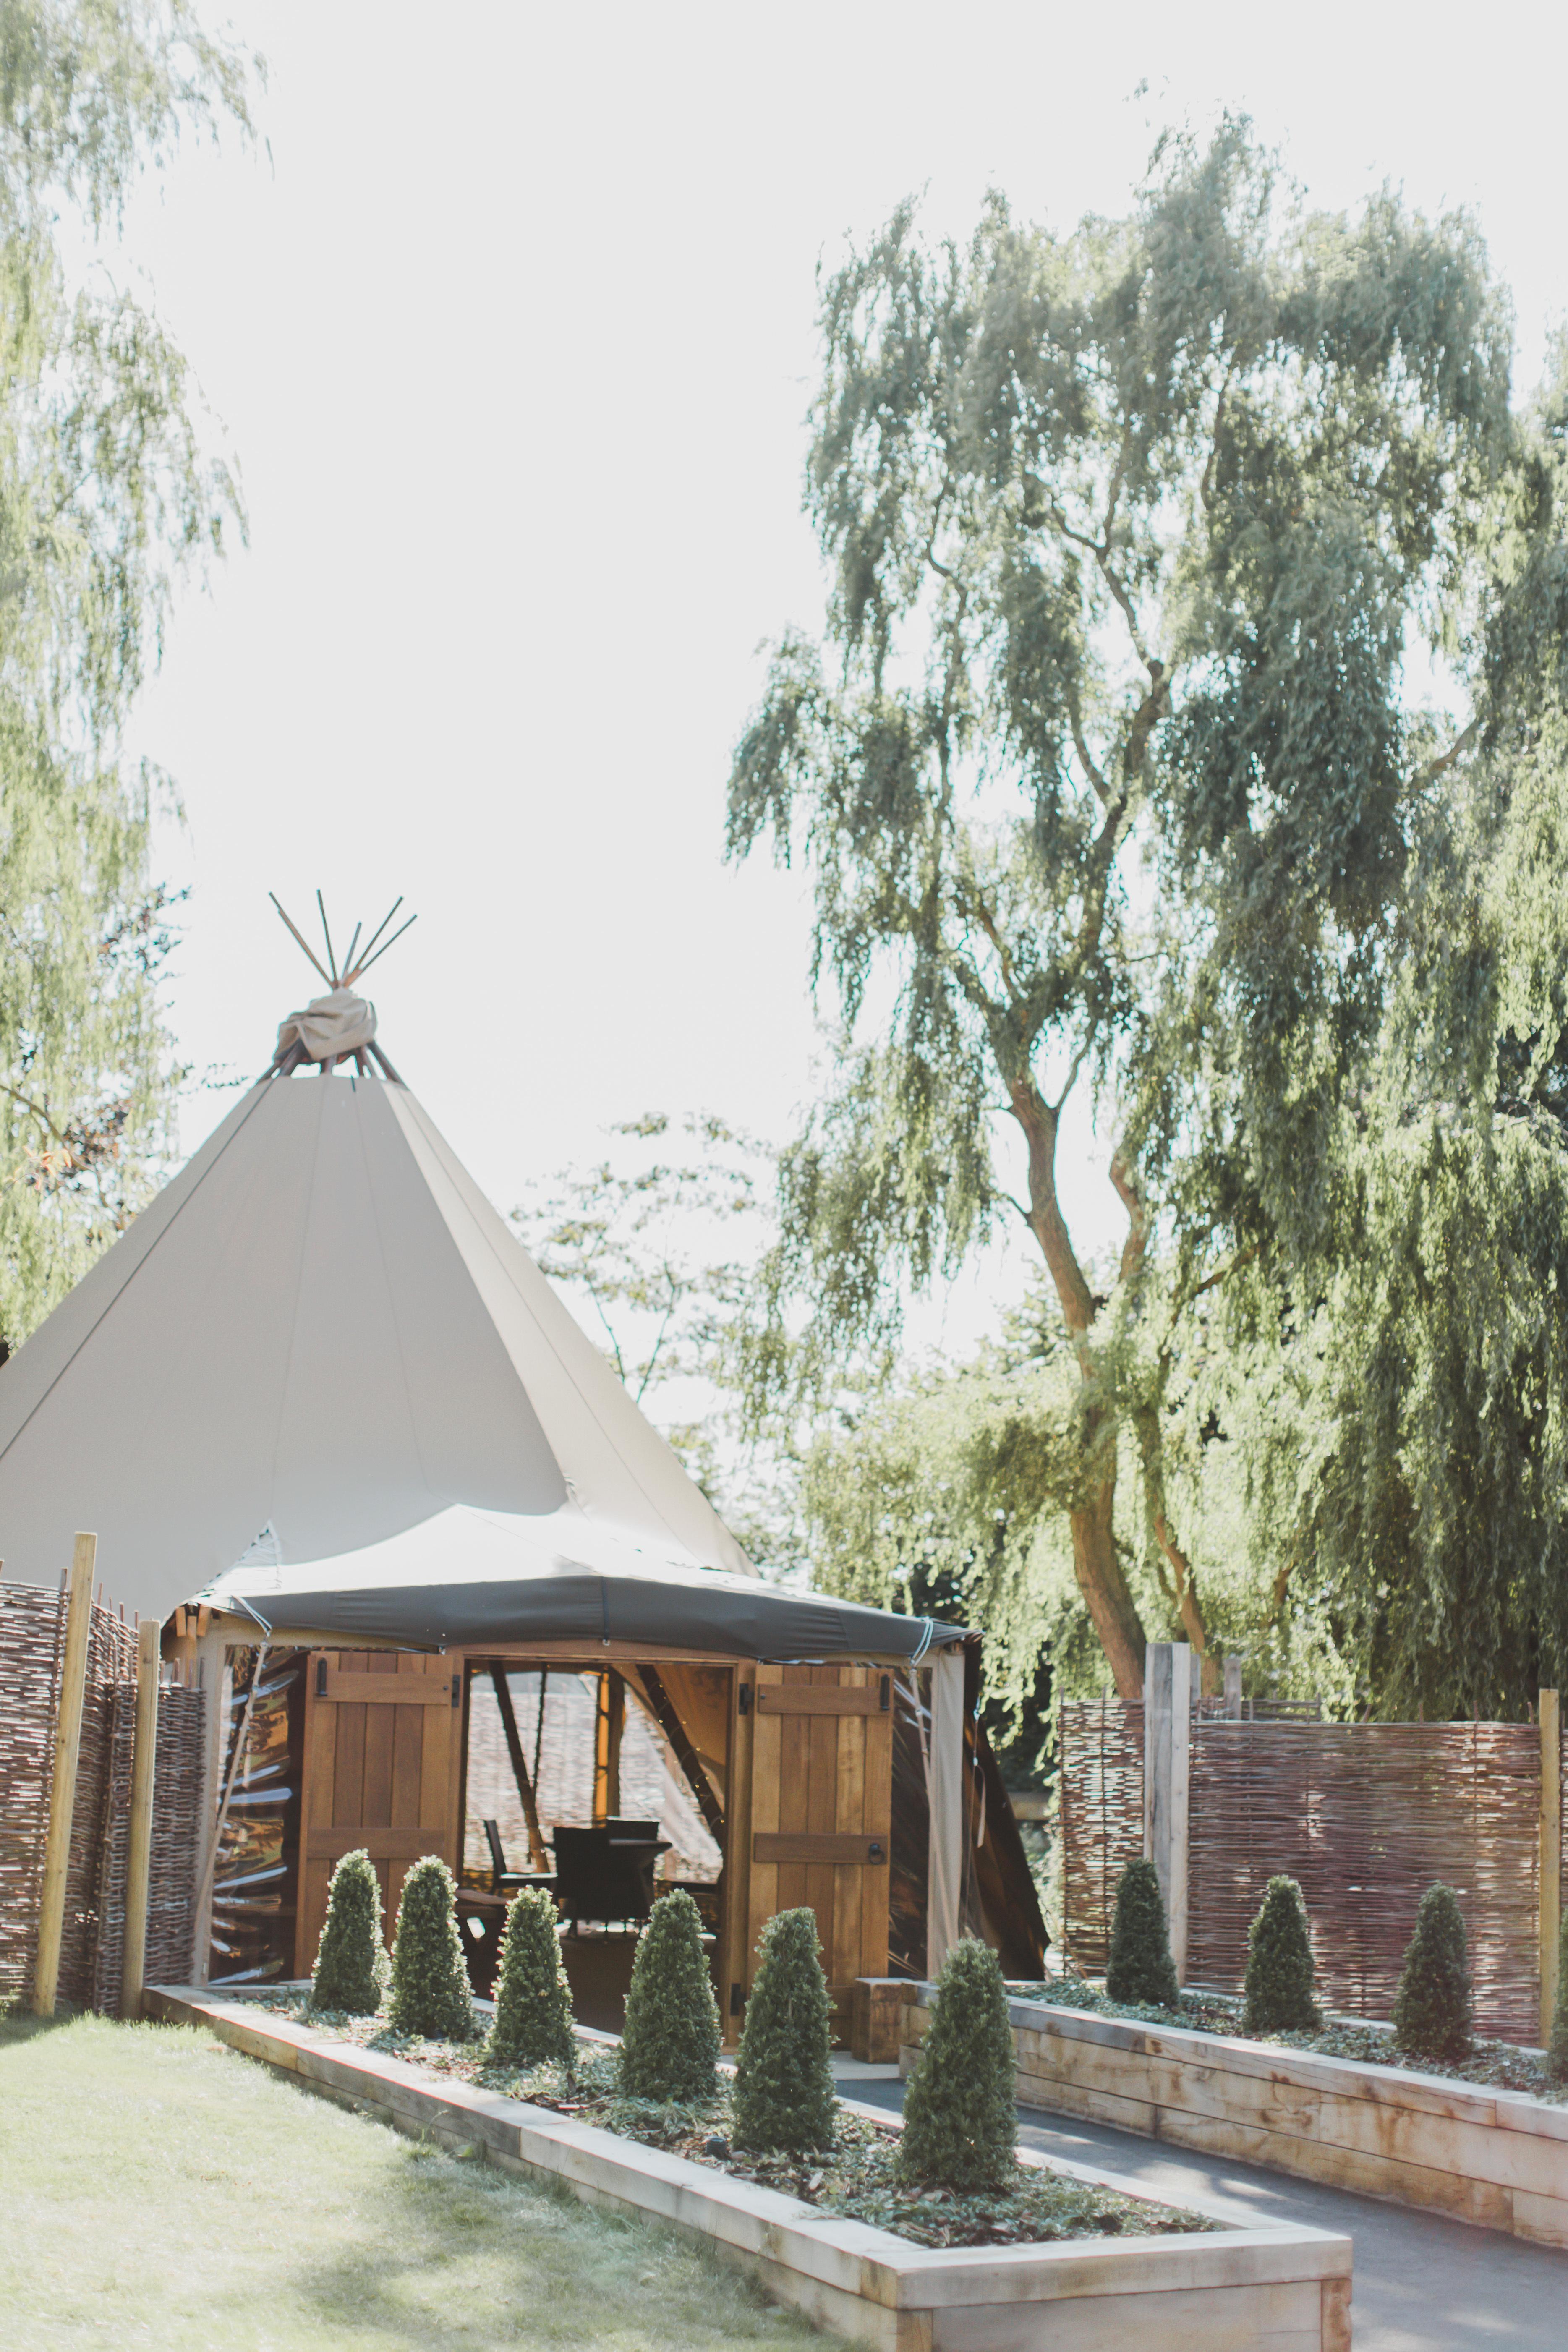 Woodlands Tipi & Outdoor Kitchen, The Woodlands At Hothorpe Hall photo #2